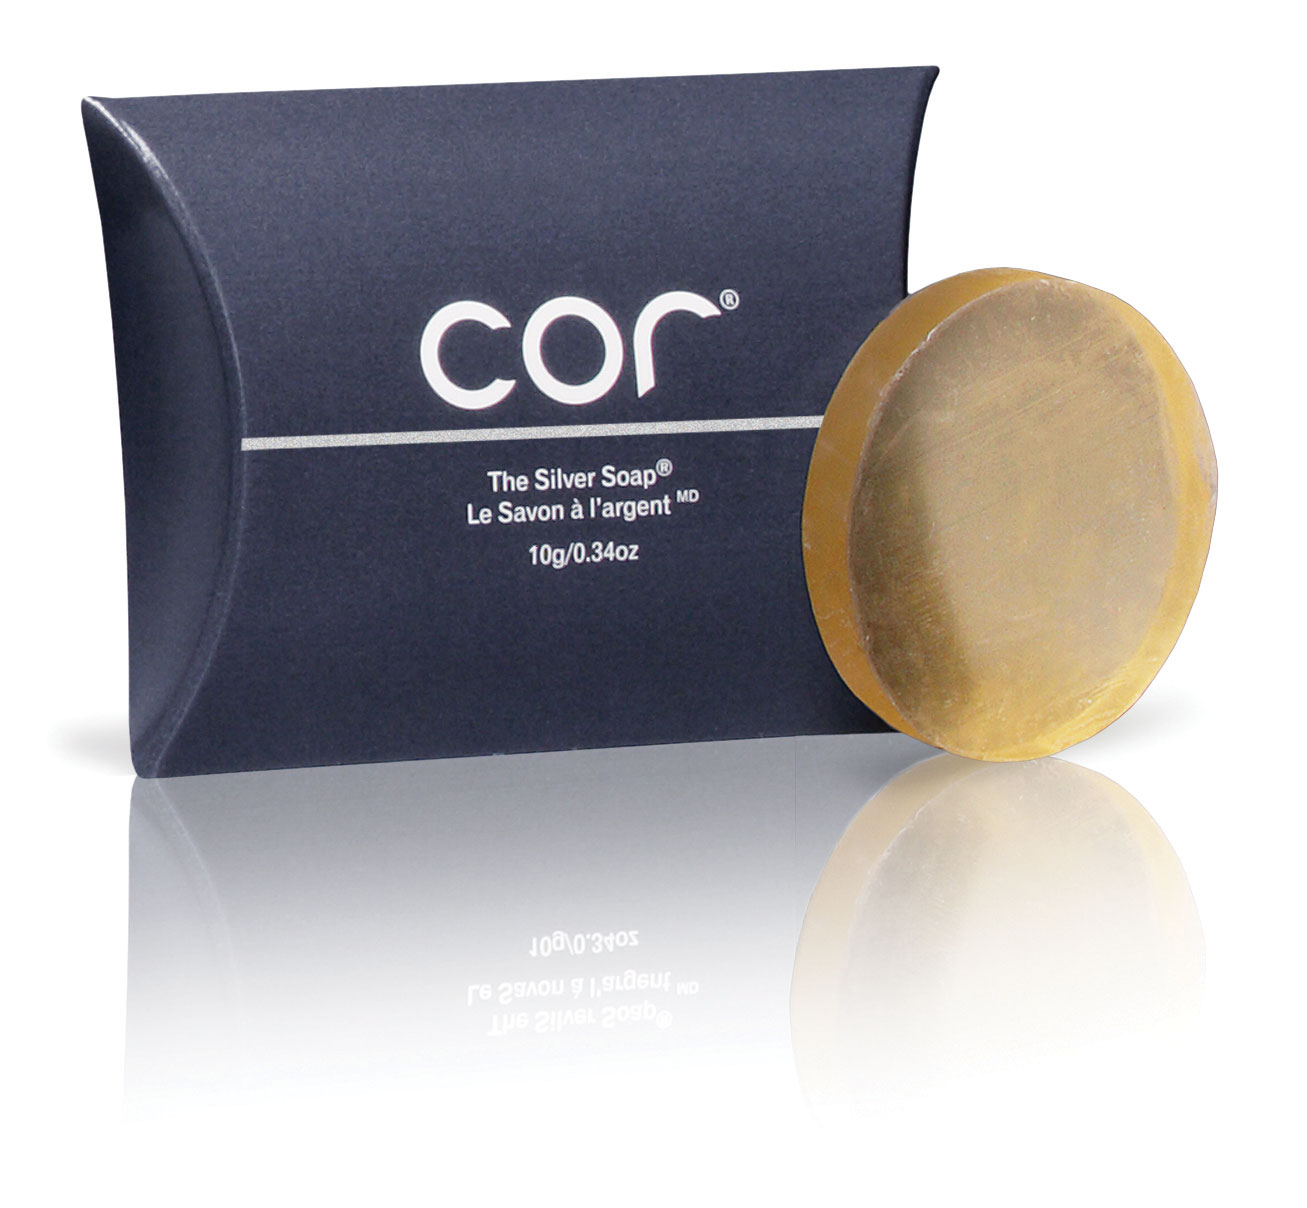 Reviewing: Cor Silver Soap